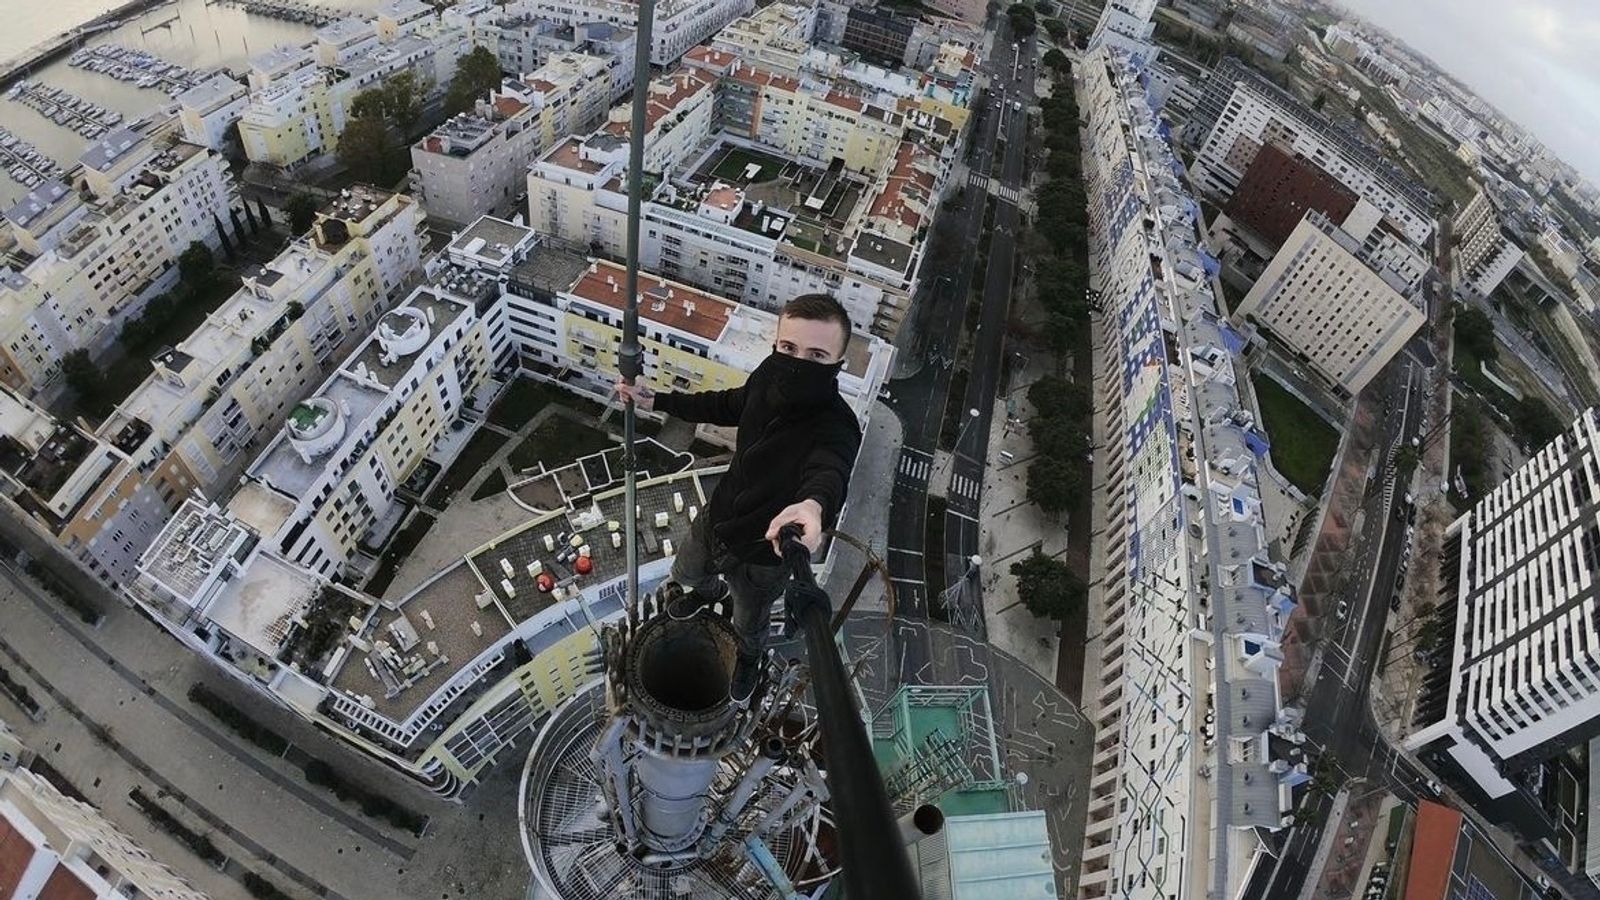 French daredevil Remi Lucidi dies after 'falling off residential